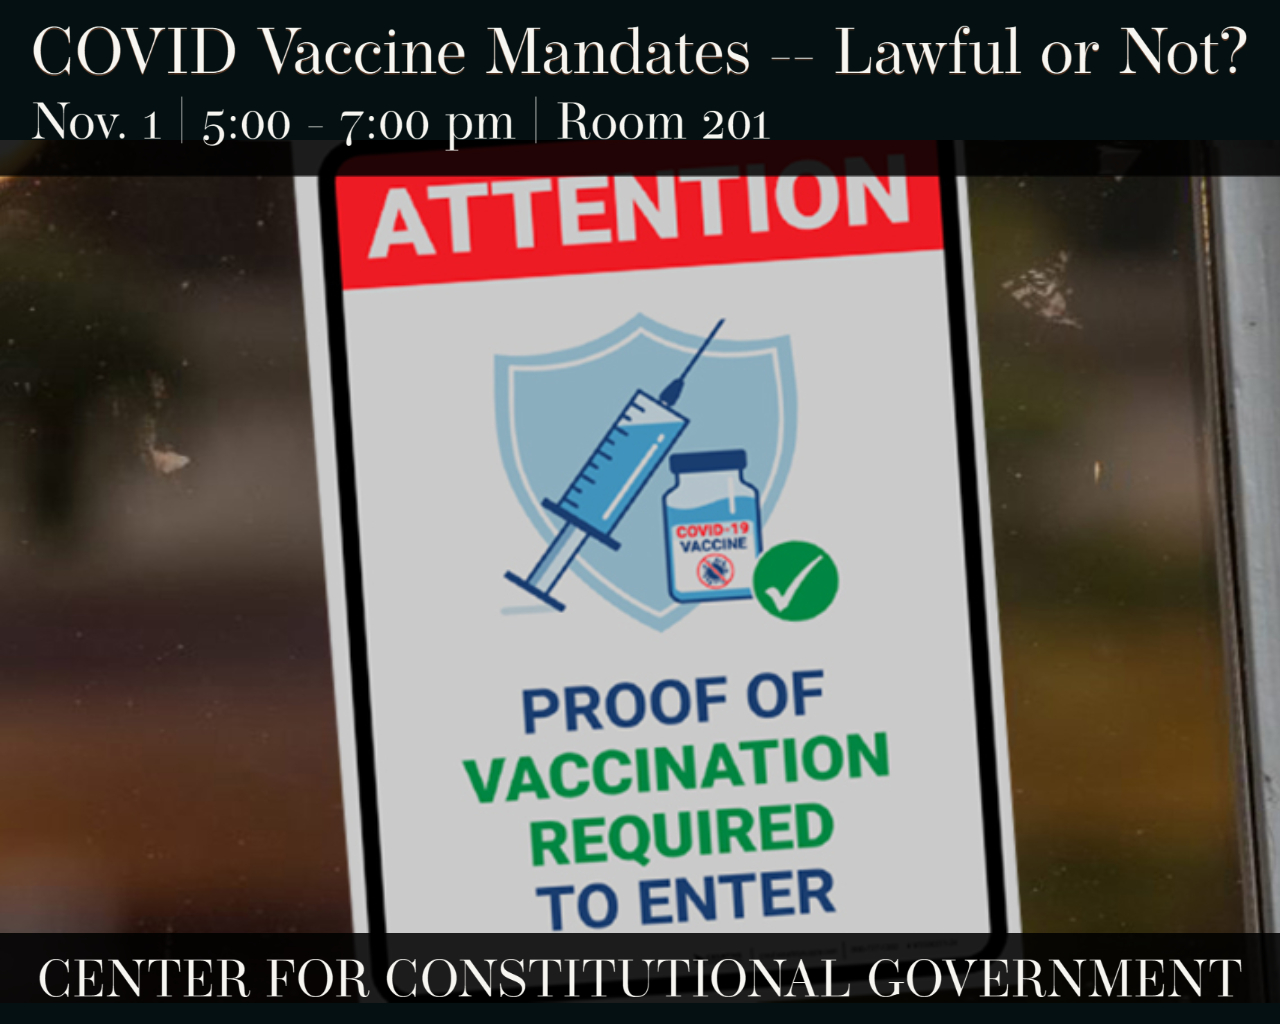 COVID Vaccine Mandates -- Lawful or Not? Nov 1 5:00 - 7:00 pm Room 201 Center for Constitutional Government